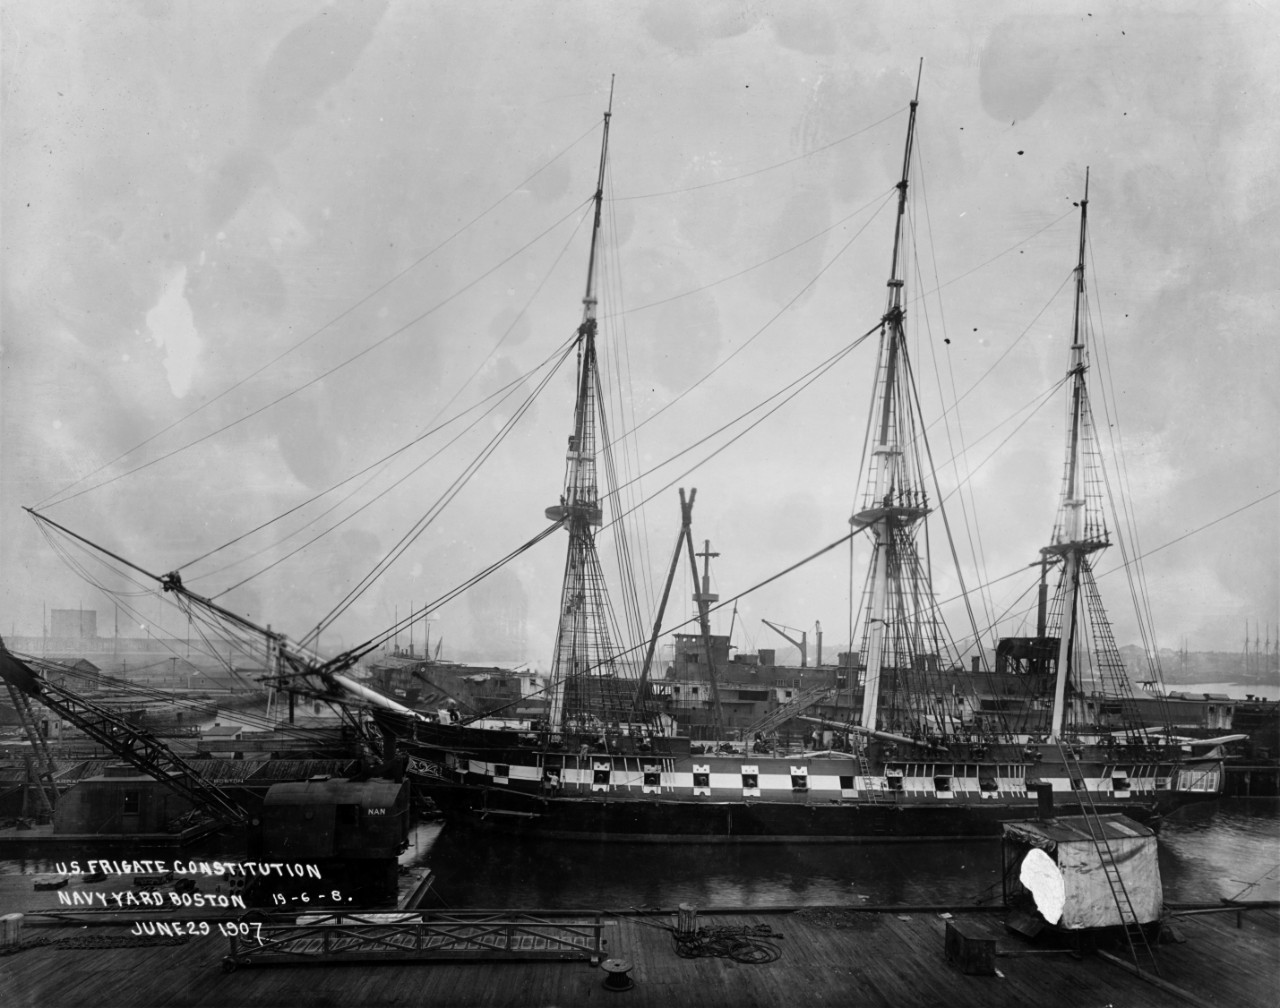 USS Constitution, at the Boston Navy Yard, 29 June 1907.